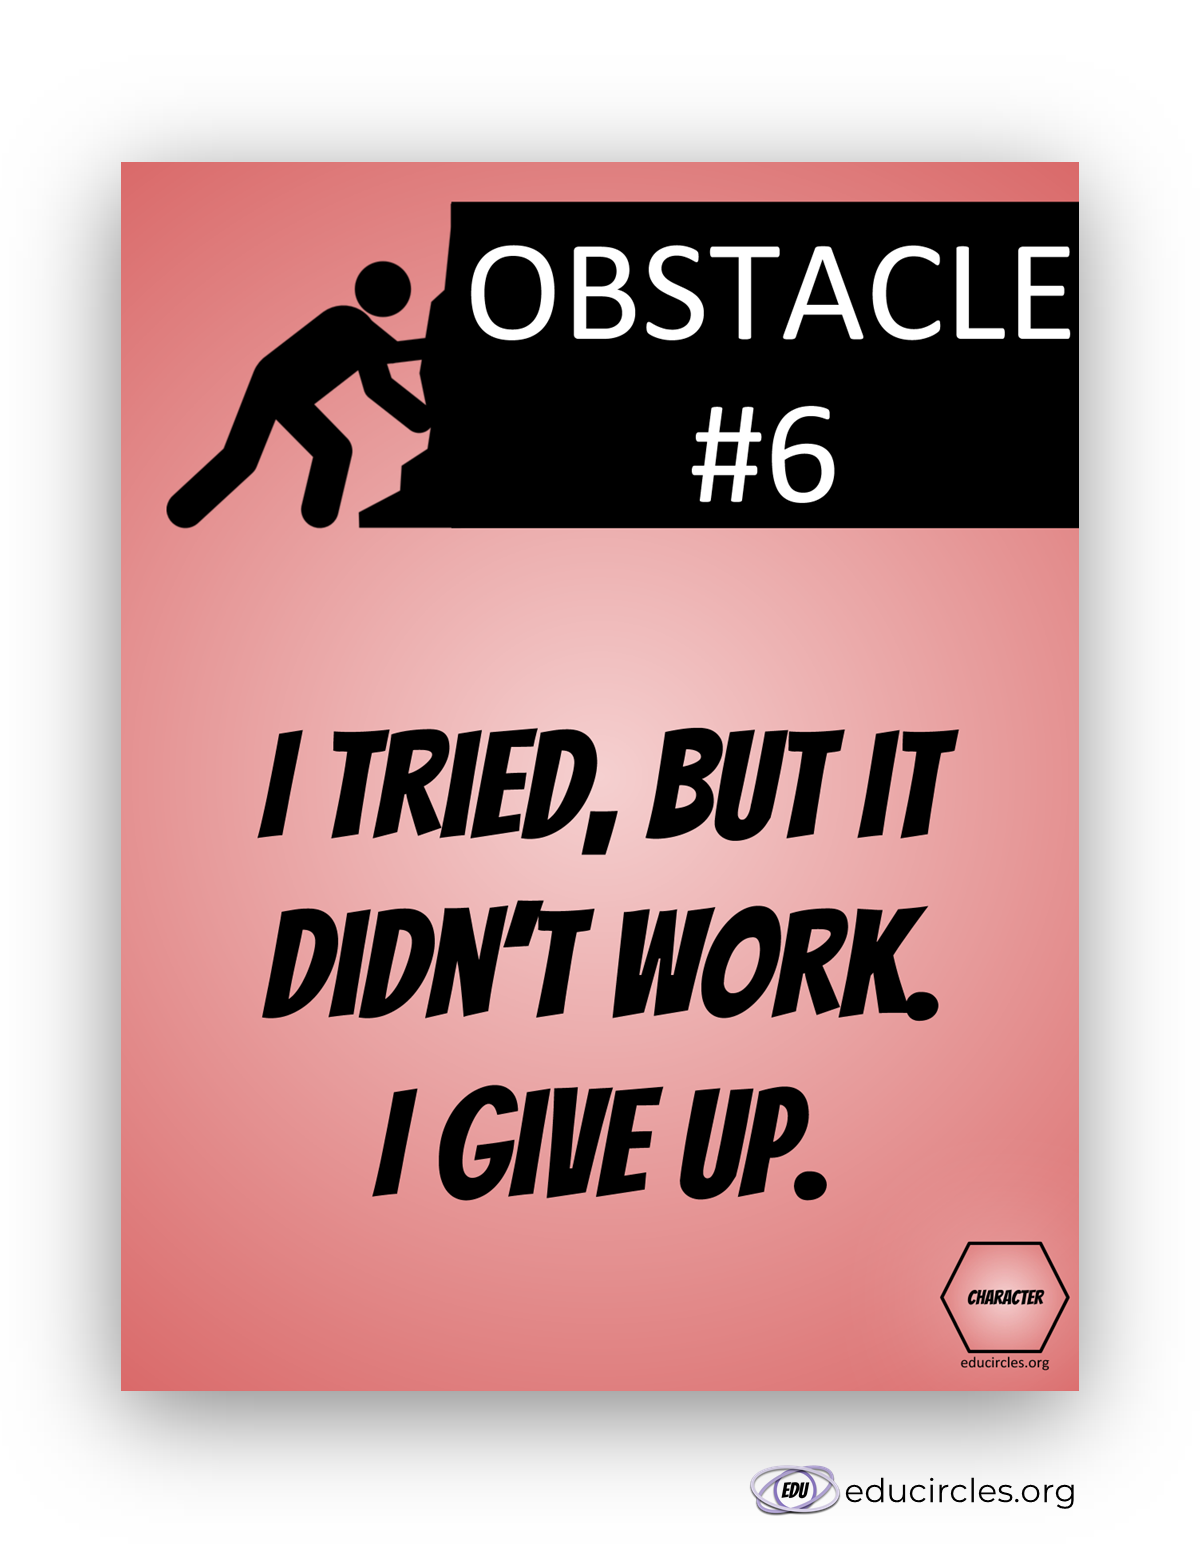 Printable Poster PDF slide 1 - obstacle 6: I tried but it didn't work. I give up.